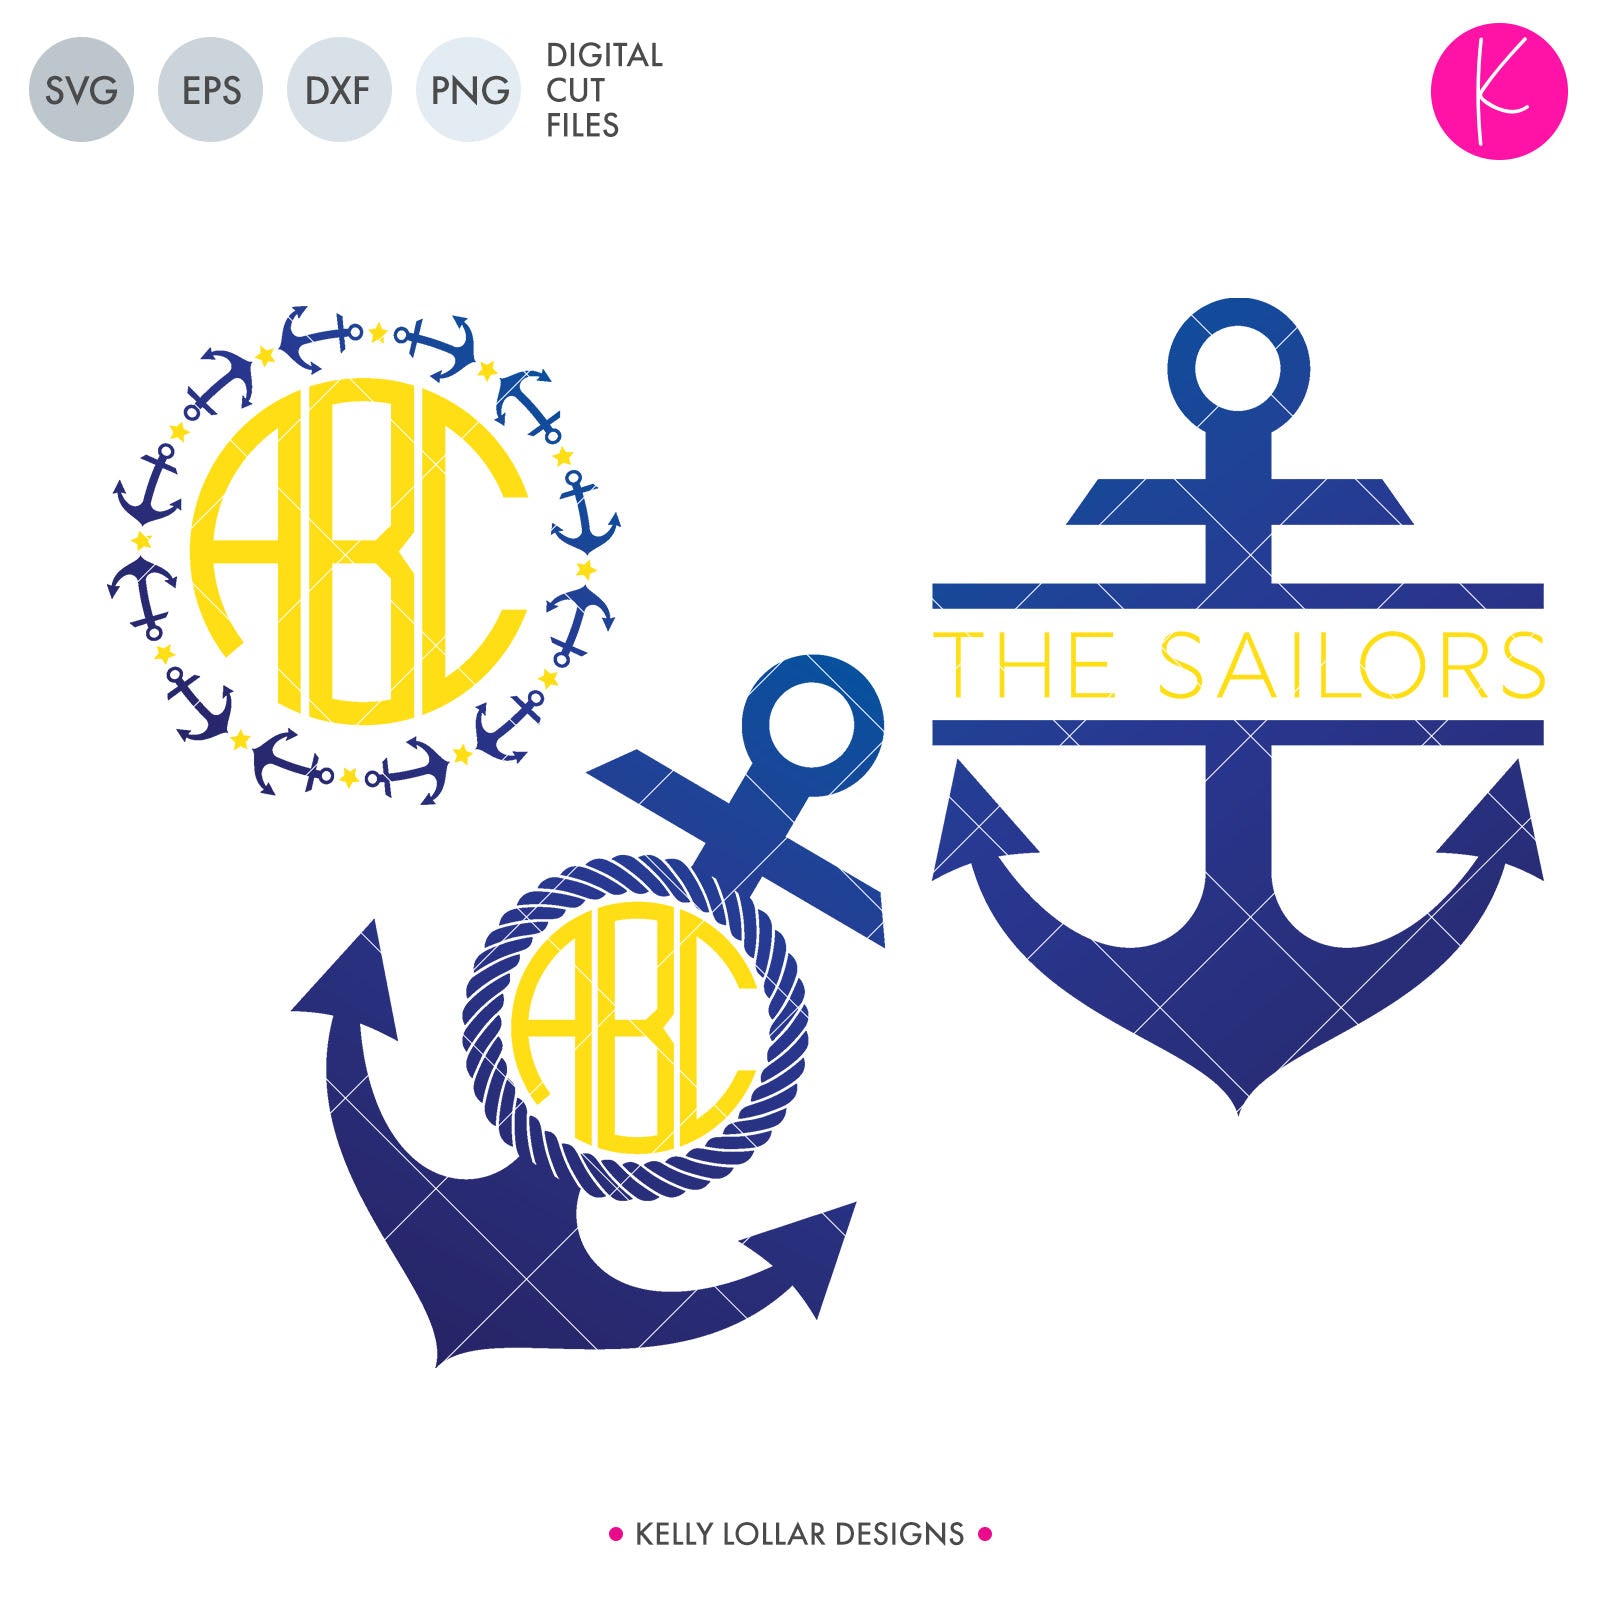 Download Monogram Svg Dxf Eps Png Cut Files Kelly Lollar Designs Tagged Summer